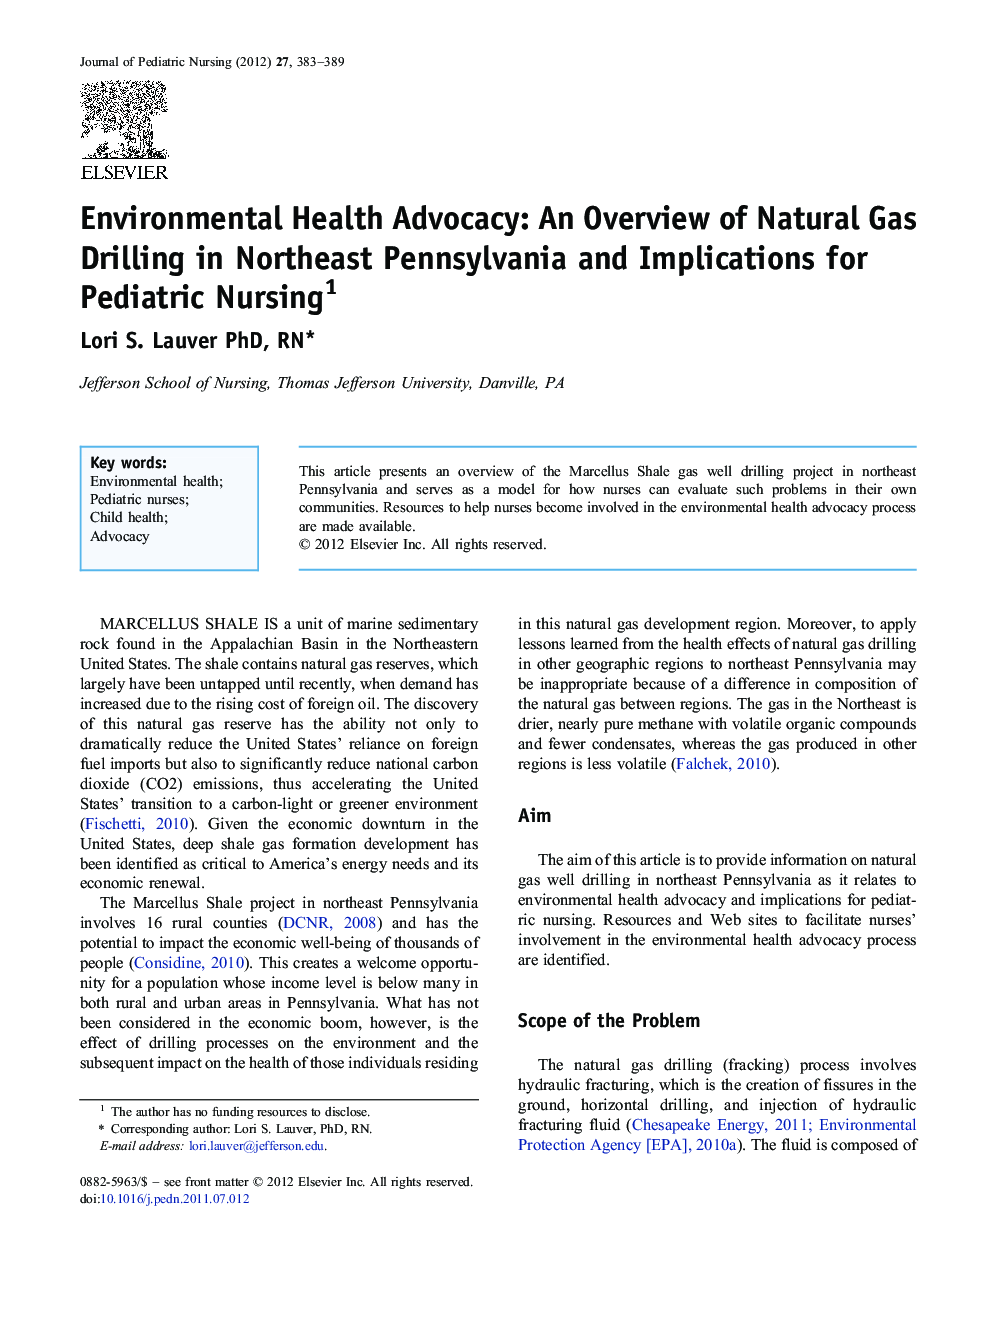 Environmental Health Advocacy: An Overview of Natural Gas Drilling in Northeast Pennsylvania and Implications for Pediatric Nursing 1